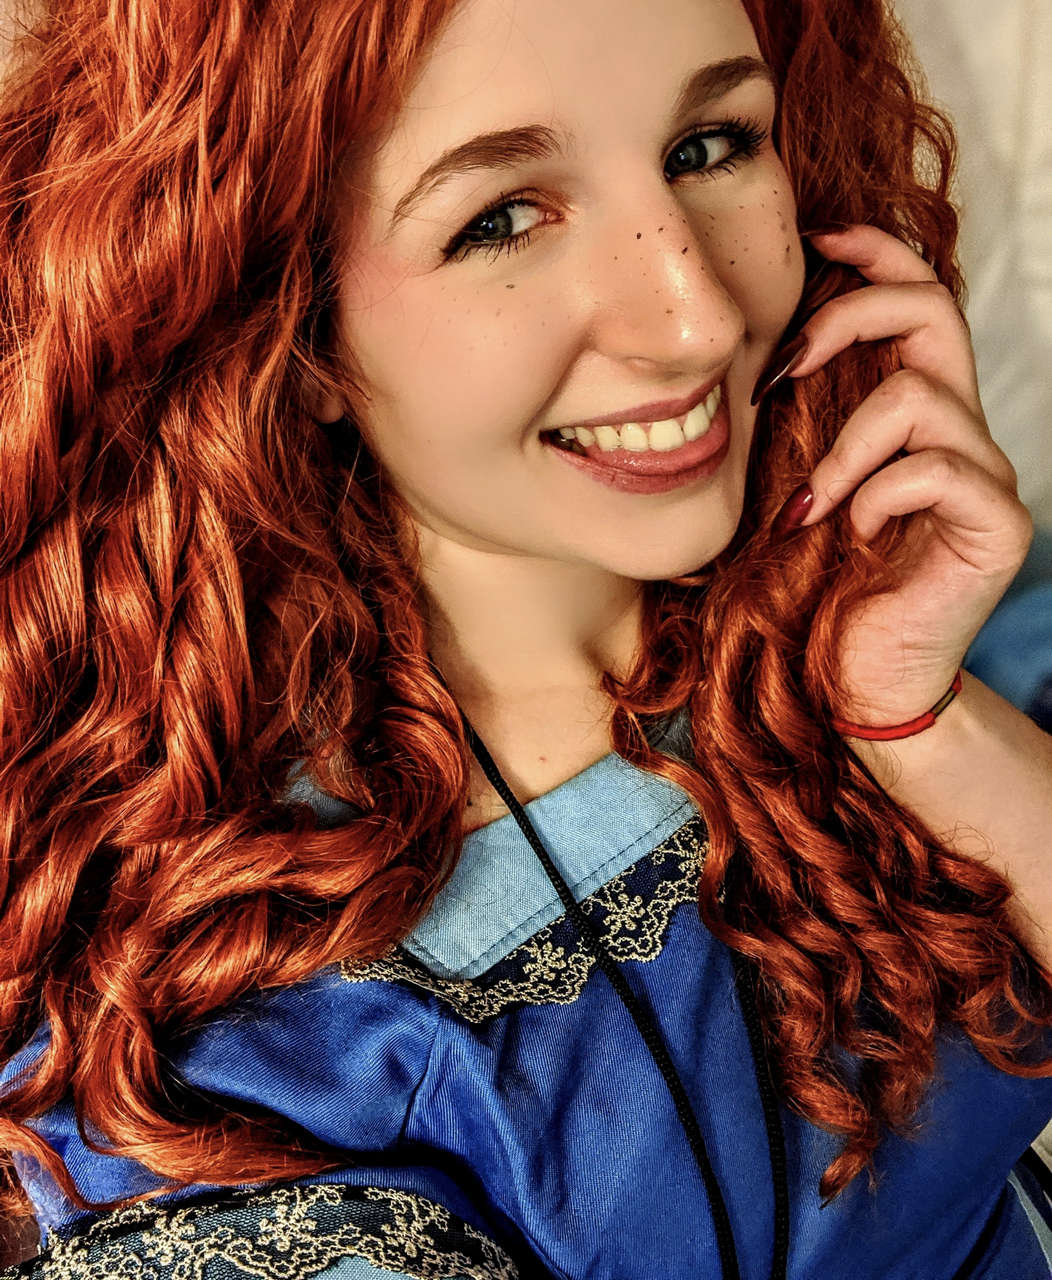 Merida By Breanna Nightwing Profile In Comments